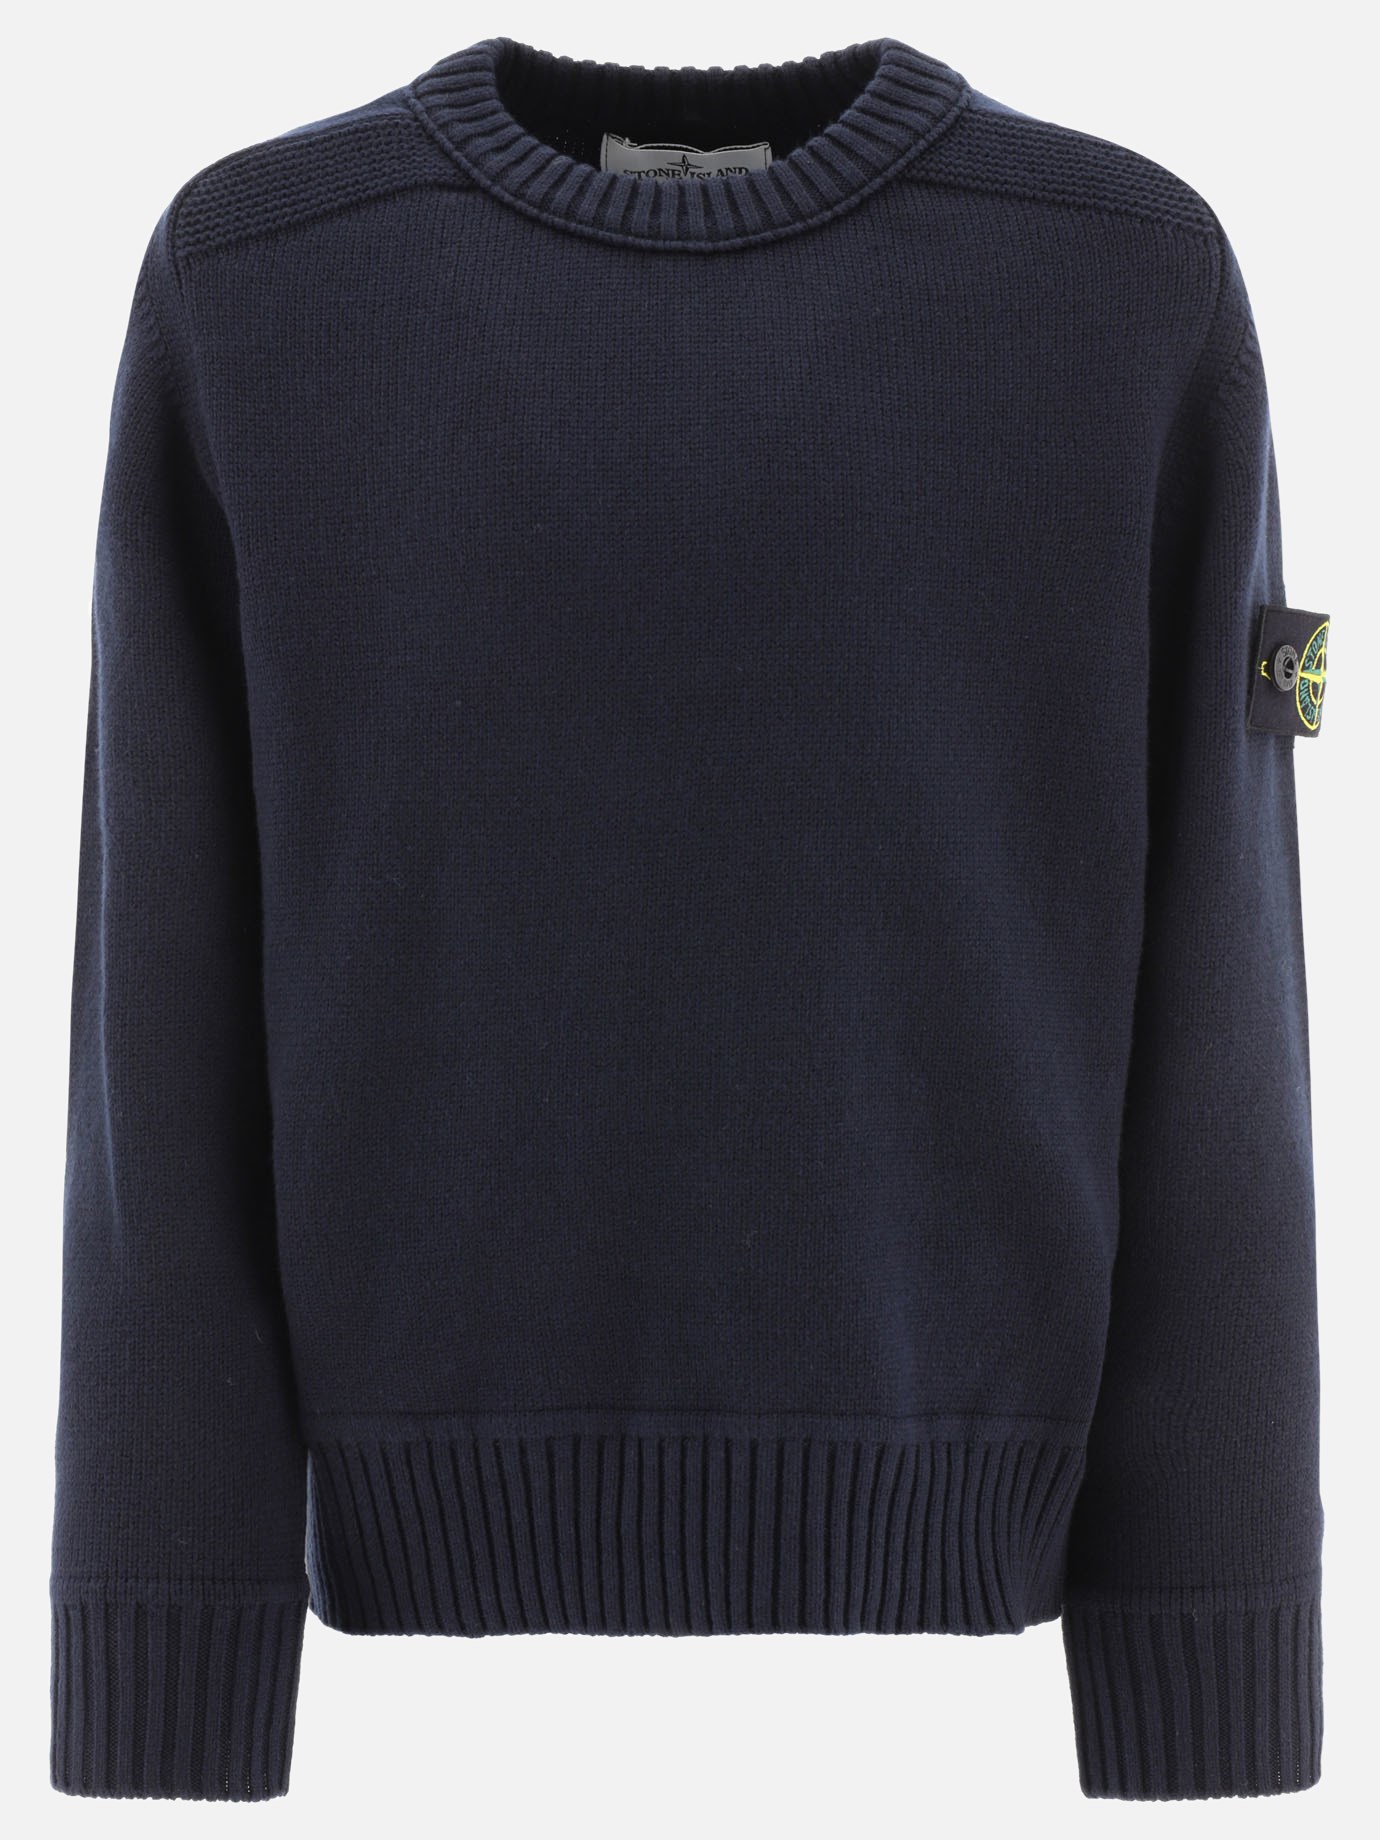  Compass  sweater by Stone Island Junior